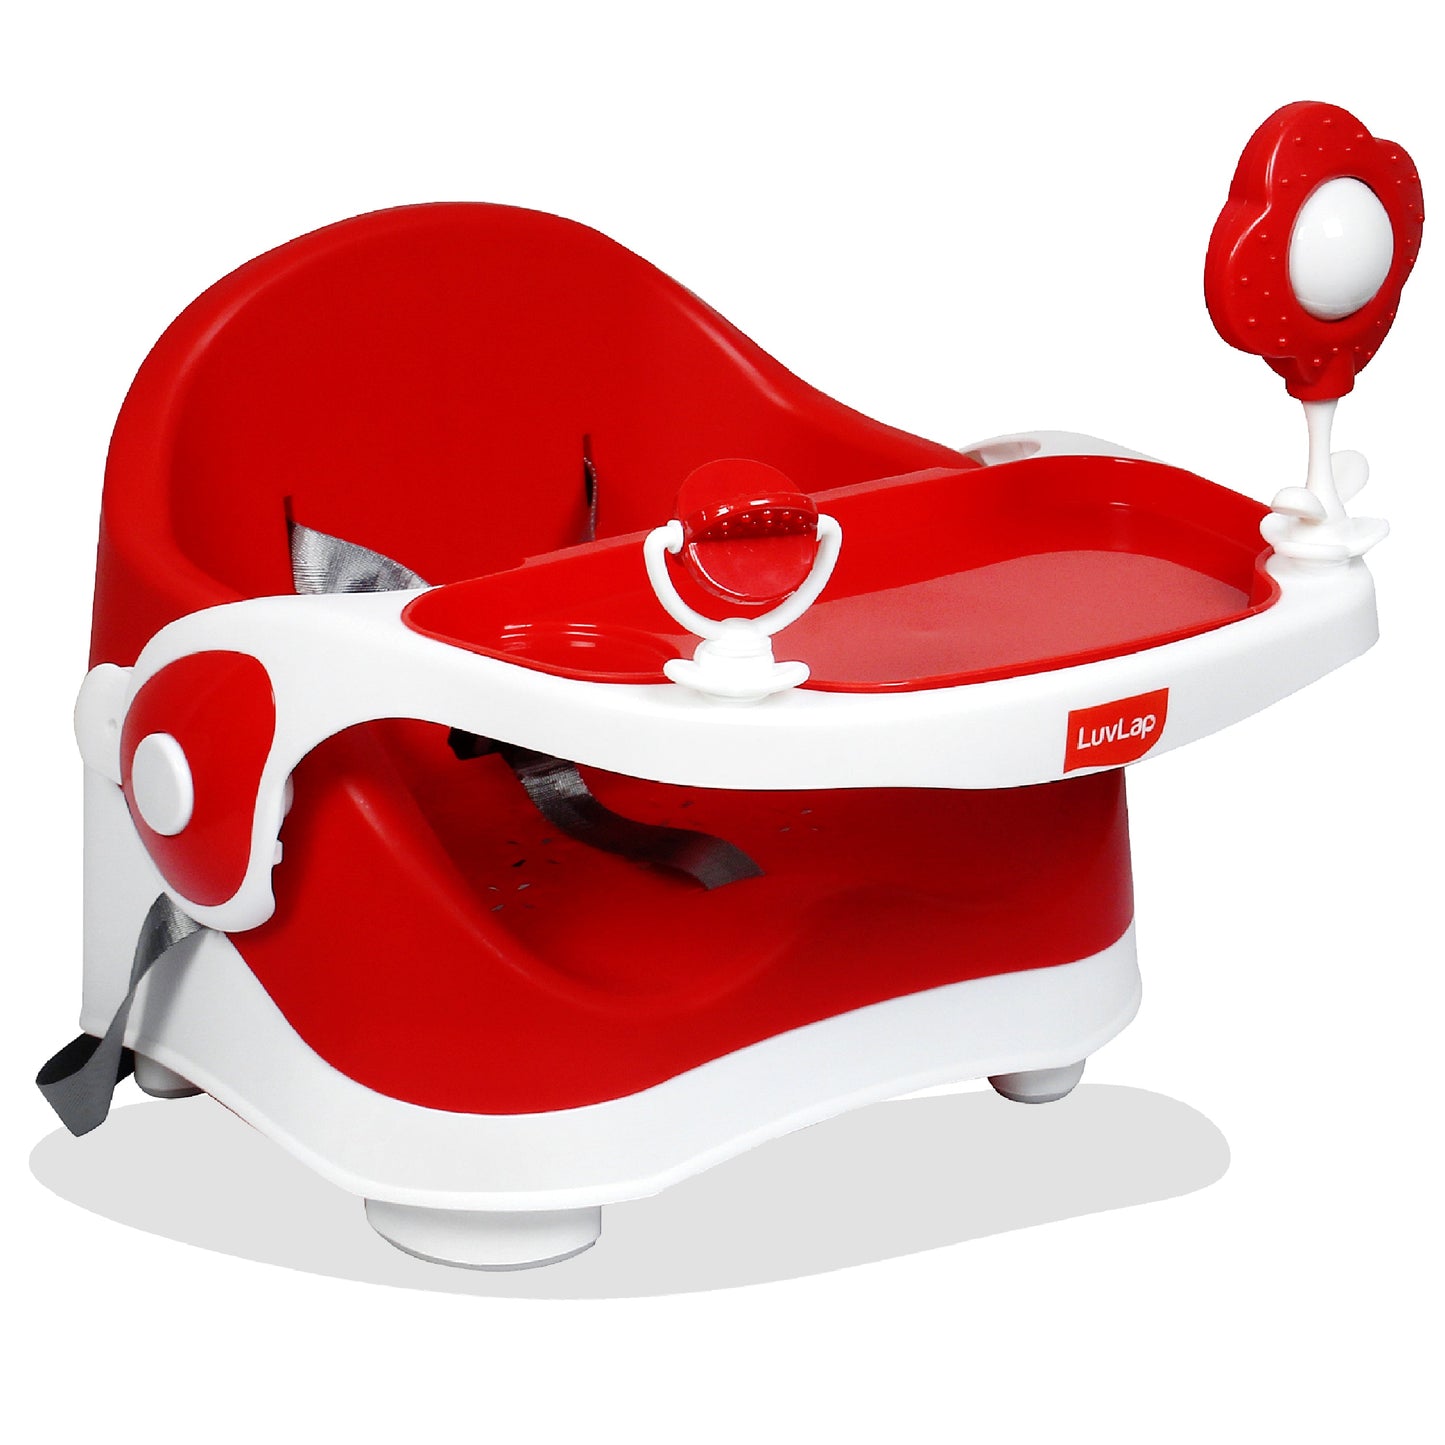 Springdale Baby Booster Seat, Red